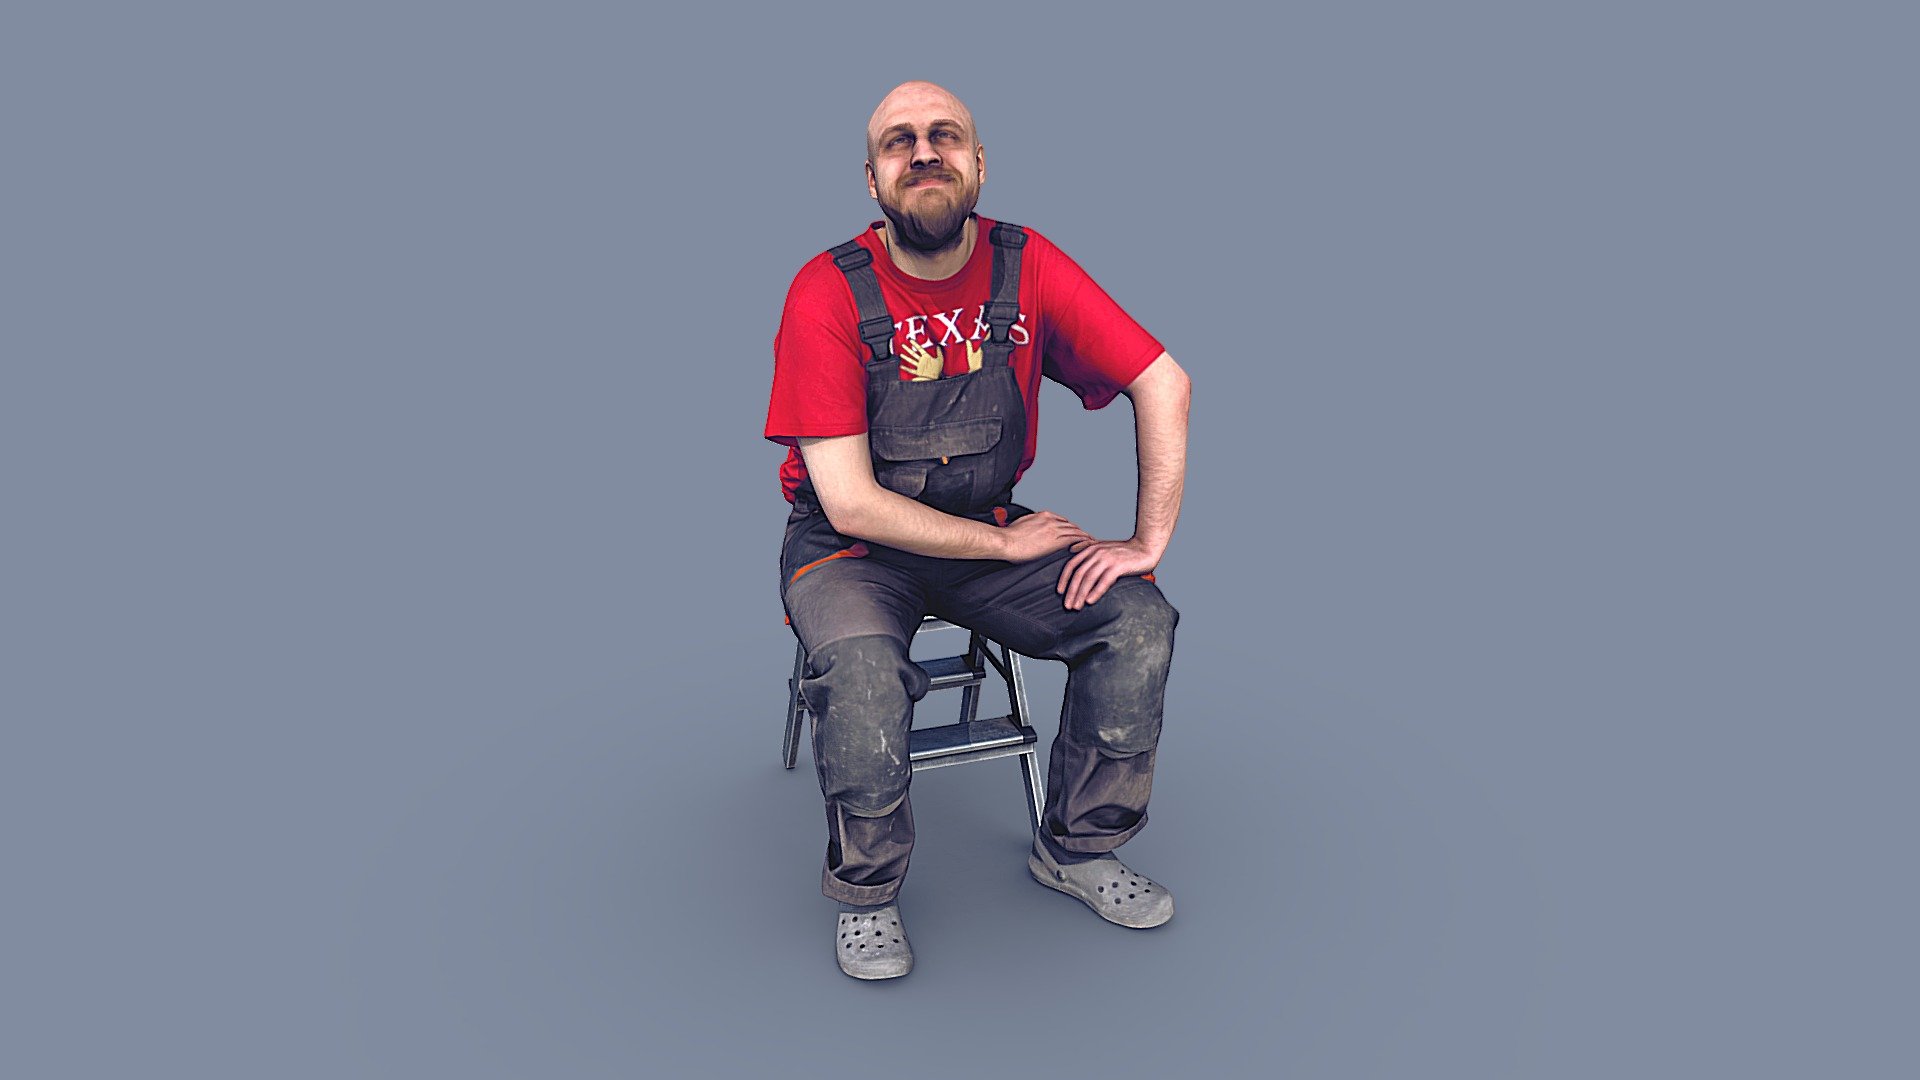 ✉️ A young man, a bald guy with a beard, a builder, a worker, in a work overalls, a construction uniform, sitting in a relaxed position, with a satisfied expression on his face.

🦾 This model will be an excellent mid-range participant. It does not need to be very close and try to see the details, it reveals and demonstrates its texture as much as possible in case of a certain distance from the foreground.

⚙️ Photorealistic Construction Worker Character 3d model ready for Virtual Reality (VR), Augmented Reality (AR), games and other real-time apps. Suitable for the architectural visualization and another graphical projects. 50 000 polygons per model 3d model